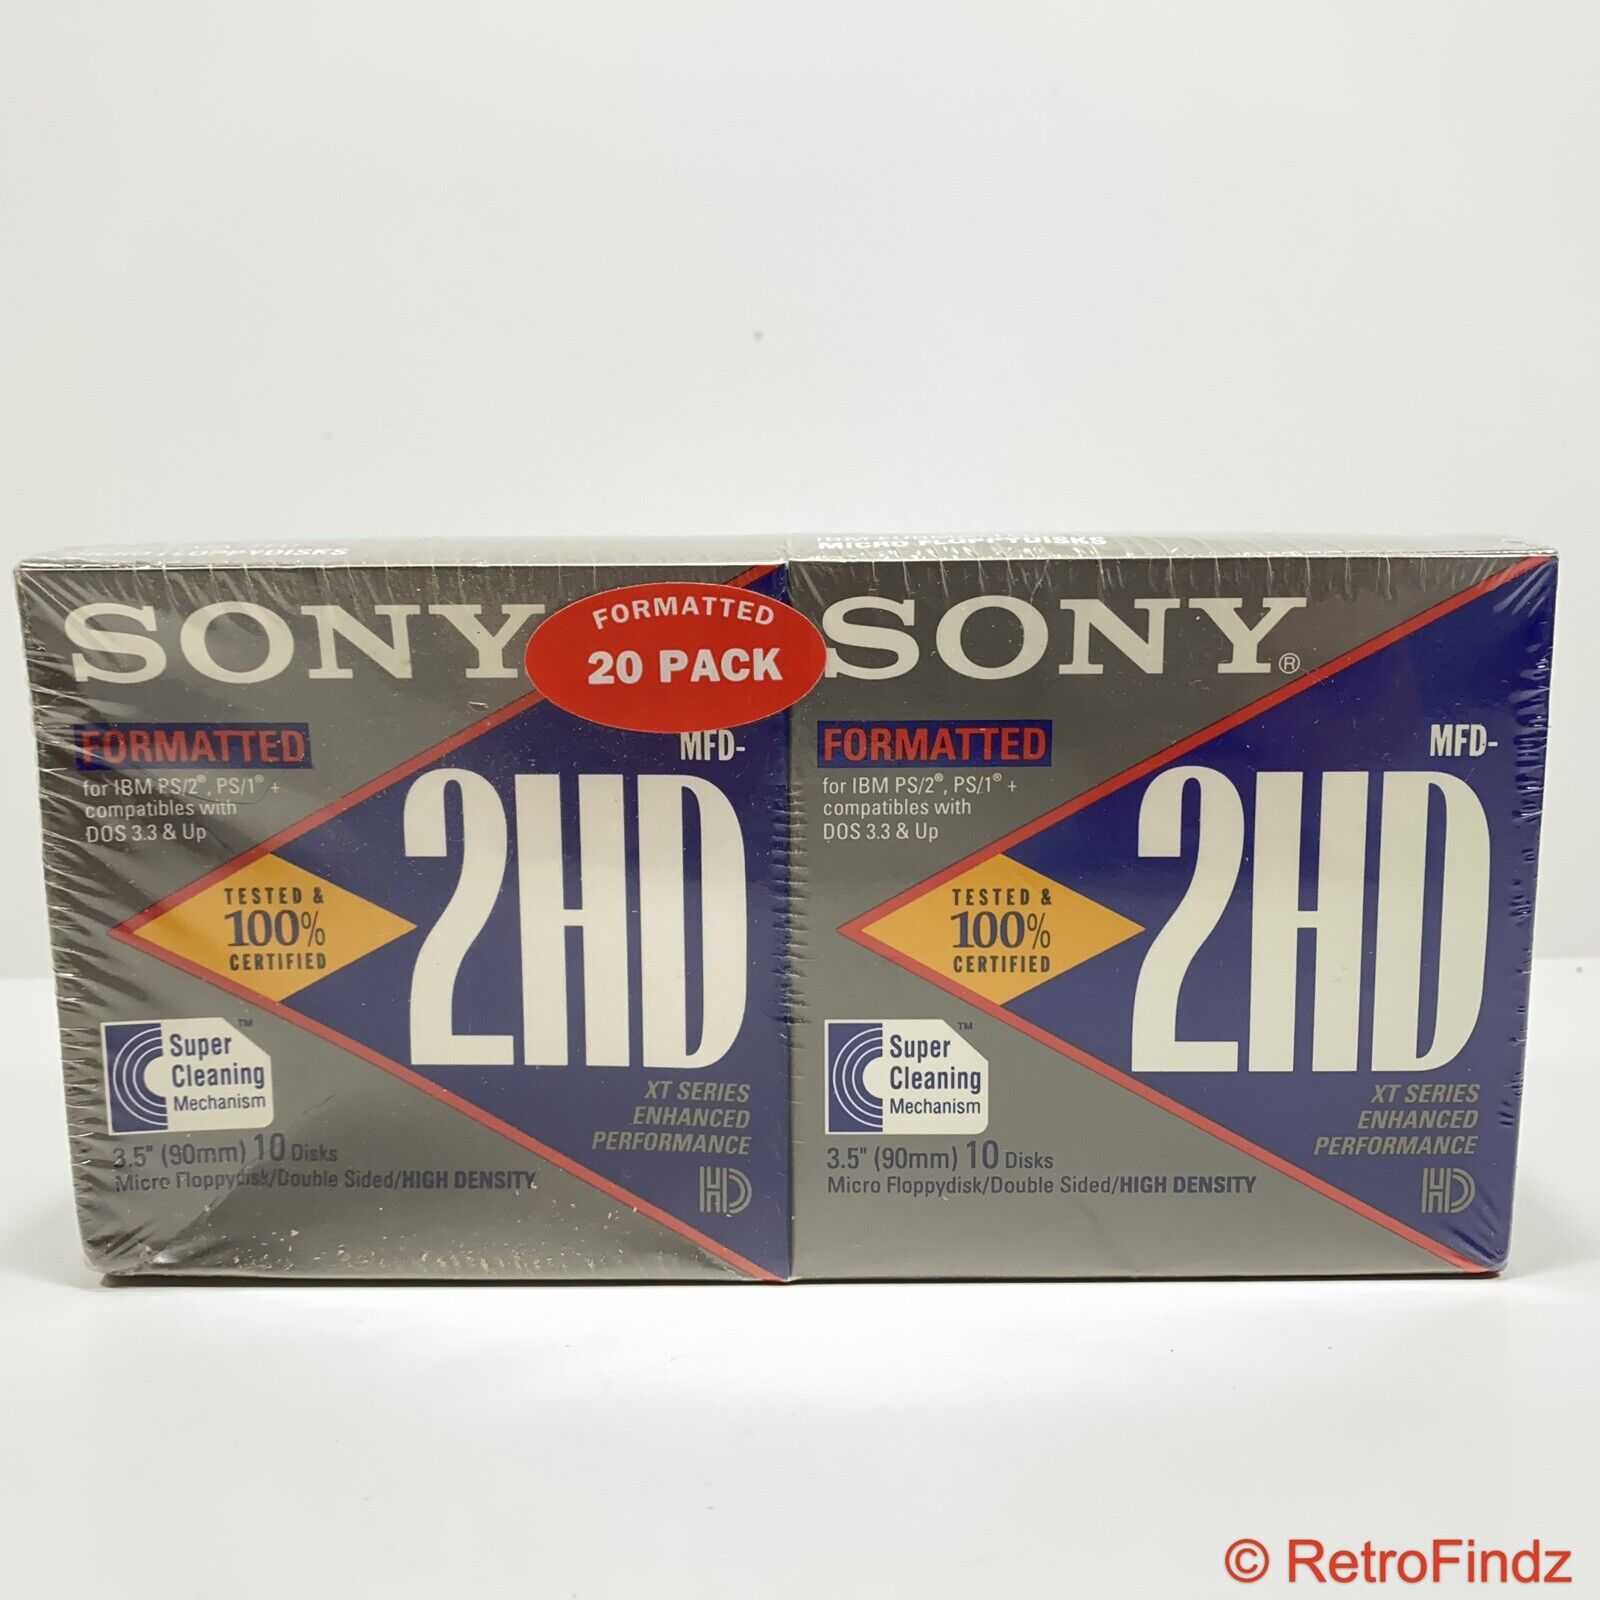 2 Sealed Sony 2HD 2DD Floppy Diskettes IBM Formatted 3.5 Inch 10 Pack (20 Total)